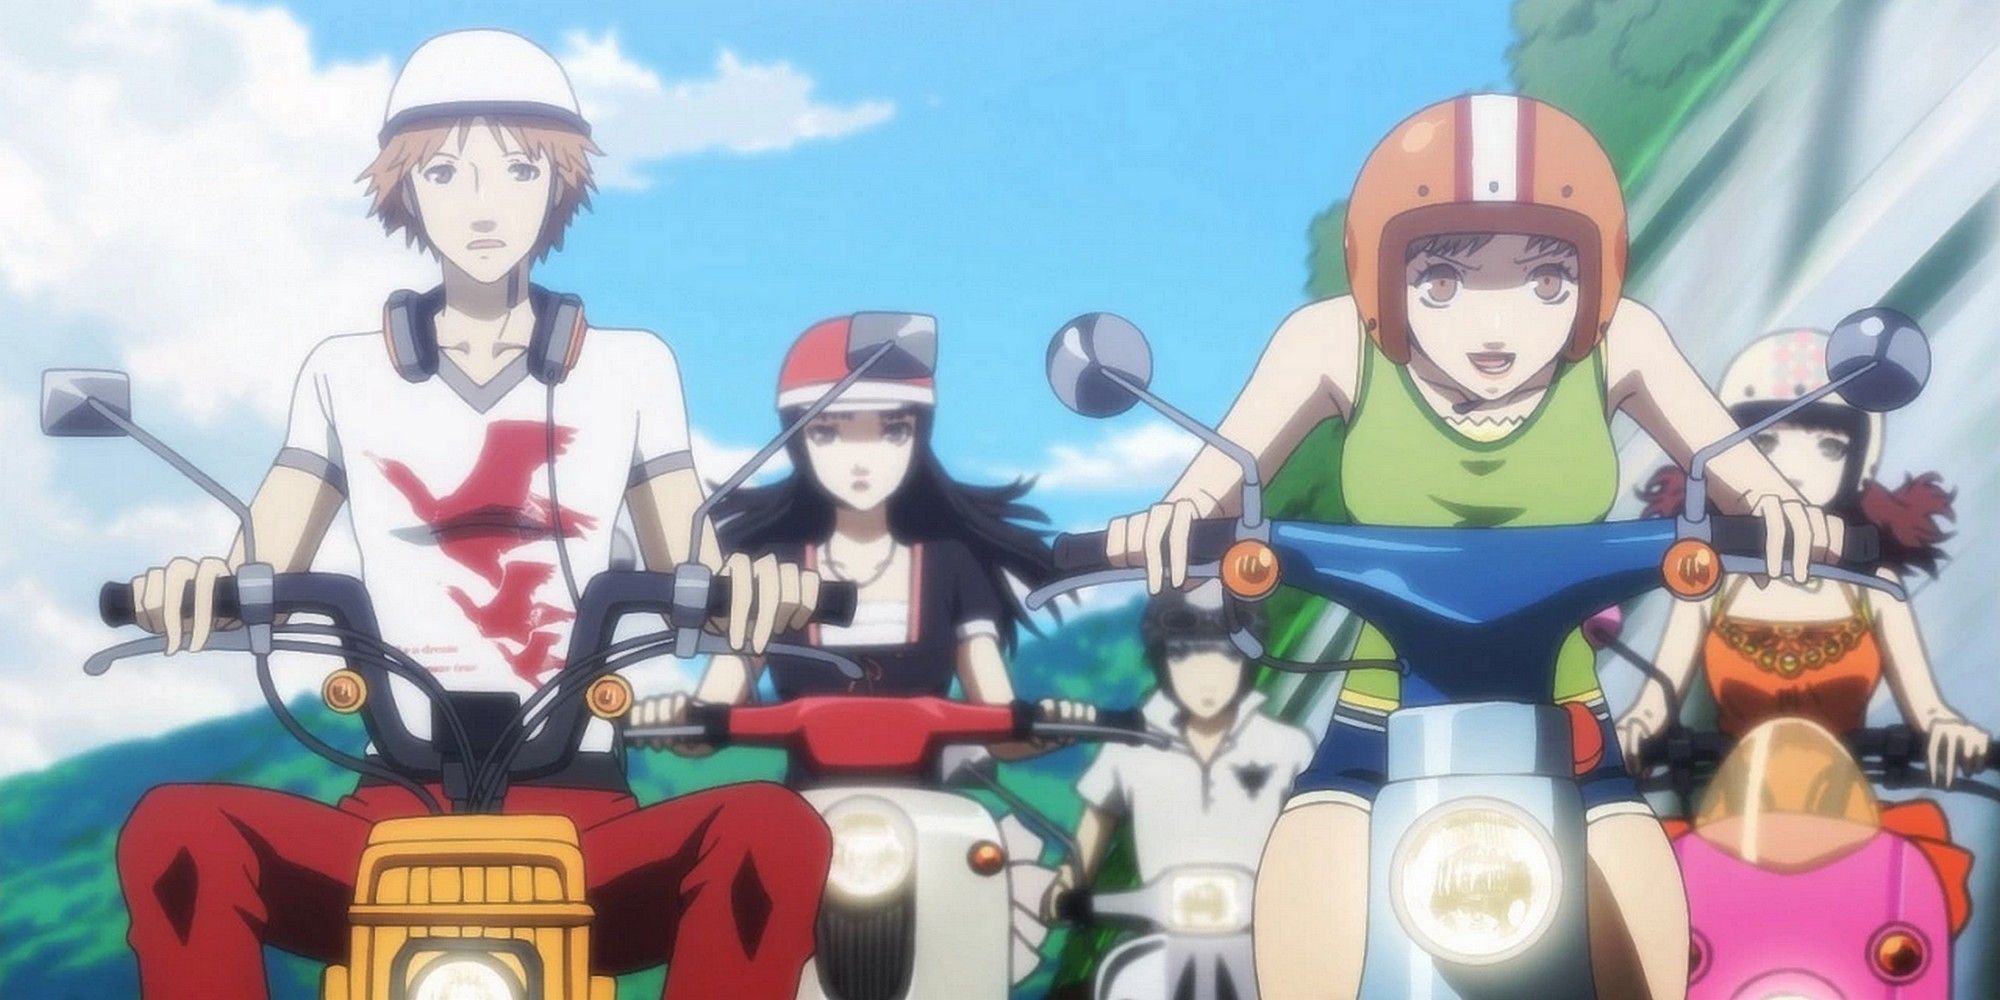 Persona 4 golden - The team riding their scooters to the beach.